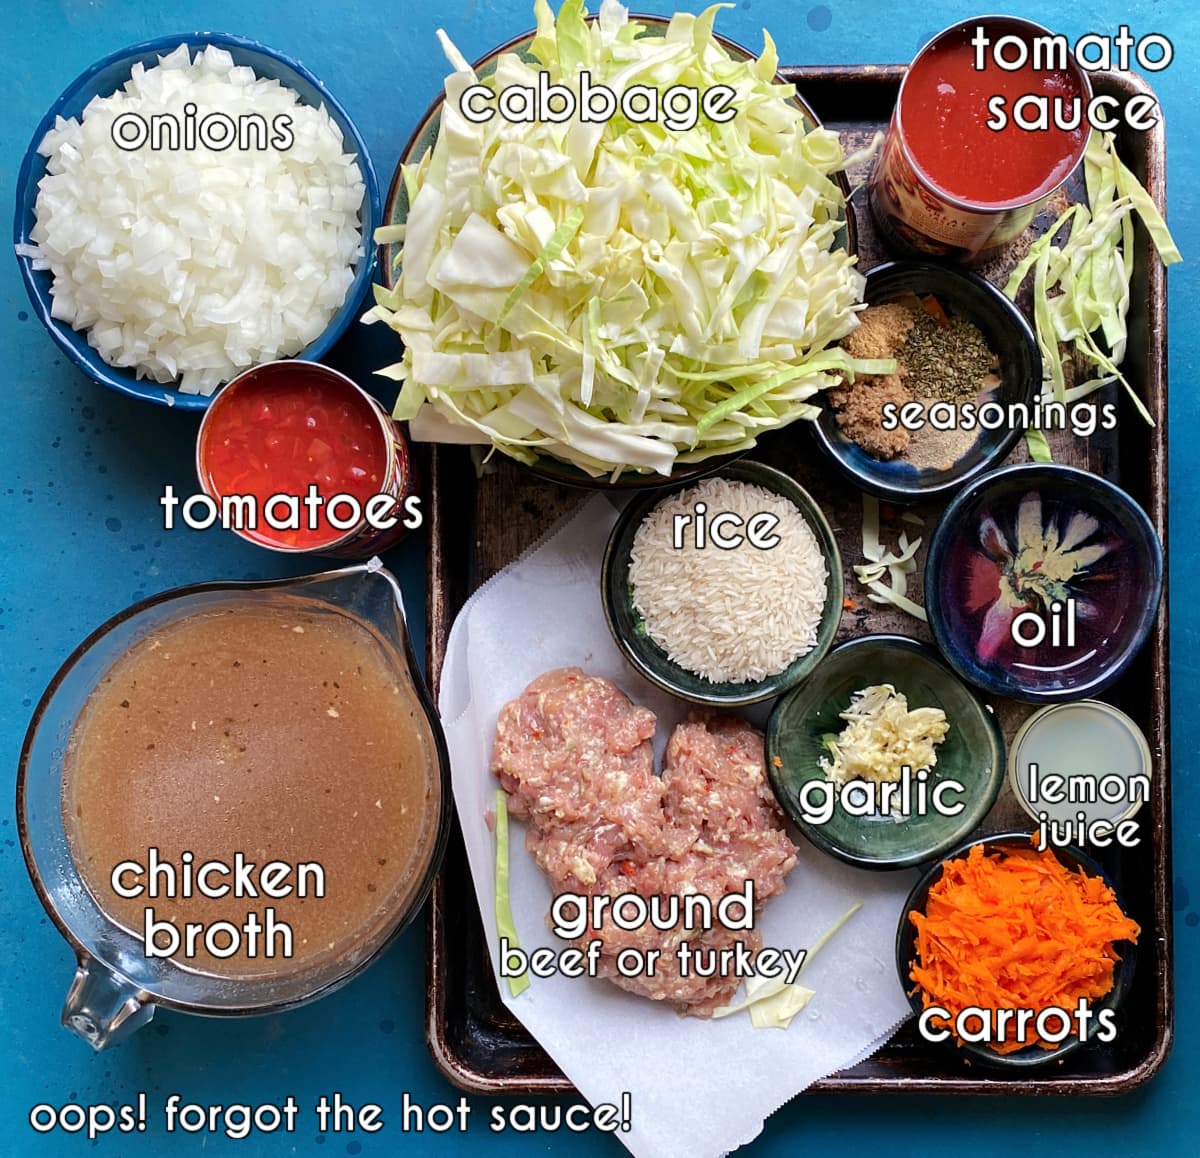 Soup ingredients, labeled: chicken broth, cabbage, carrots, rice, onions, meat, garlic, tomatoes, tomato sauce, lemon juice, hot sauce, and seasonings.